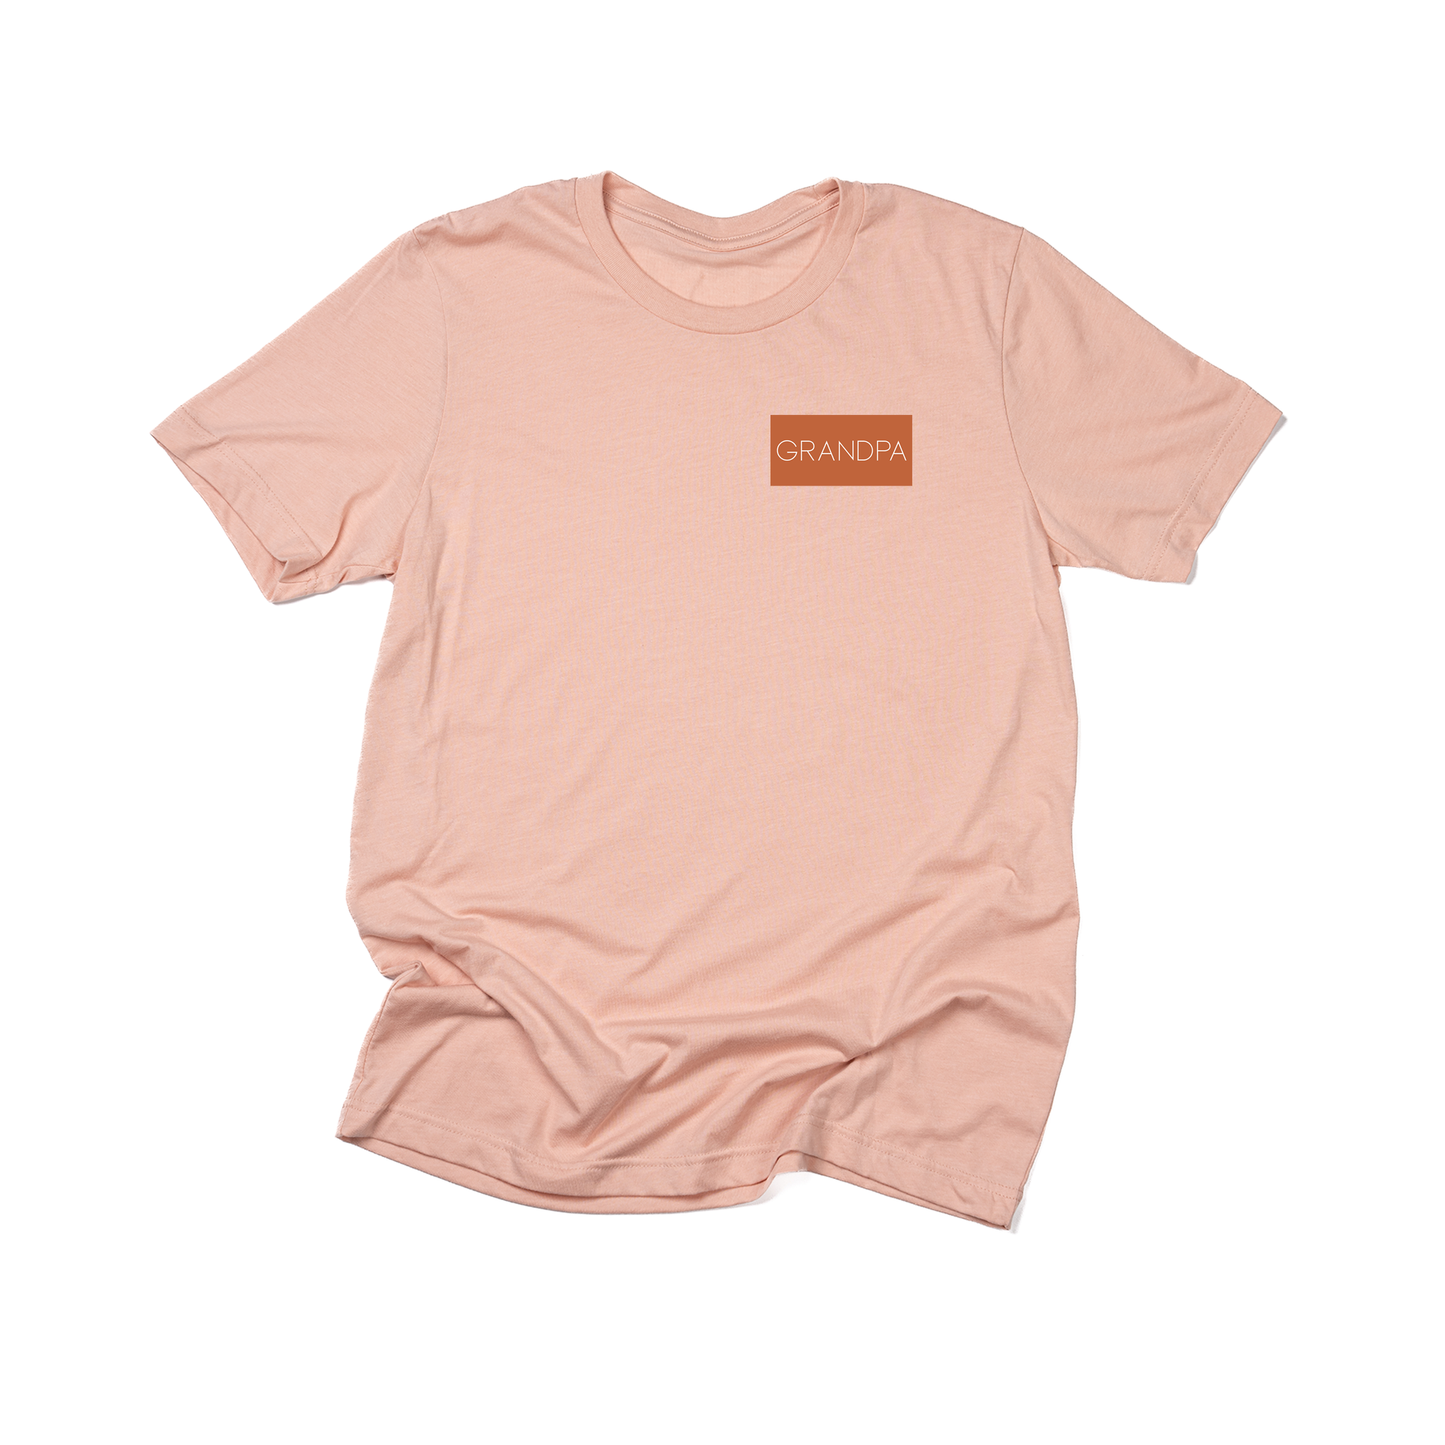 Grandpa (Boxed Collection, Pocket, Rust Box/White Text) - Tee (Peach)